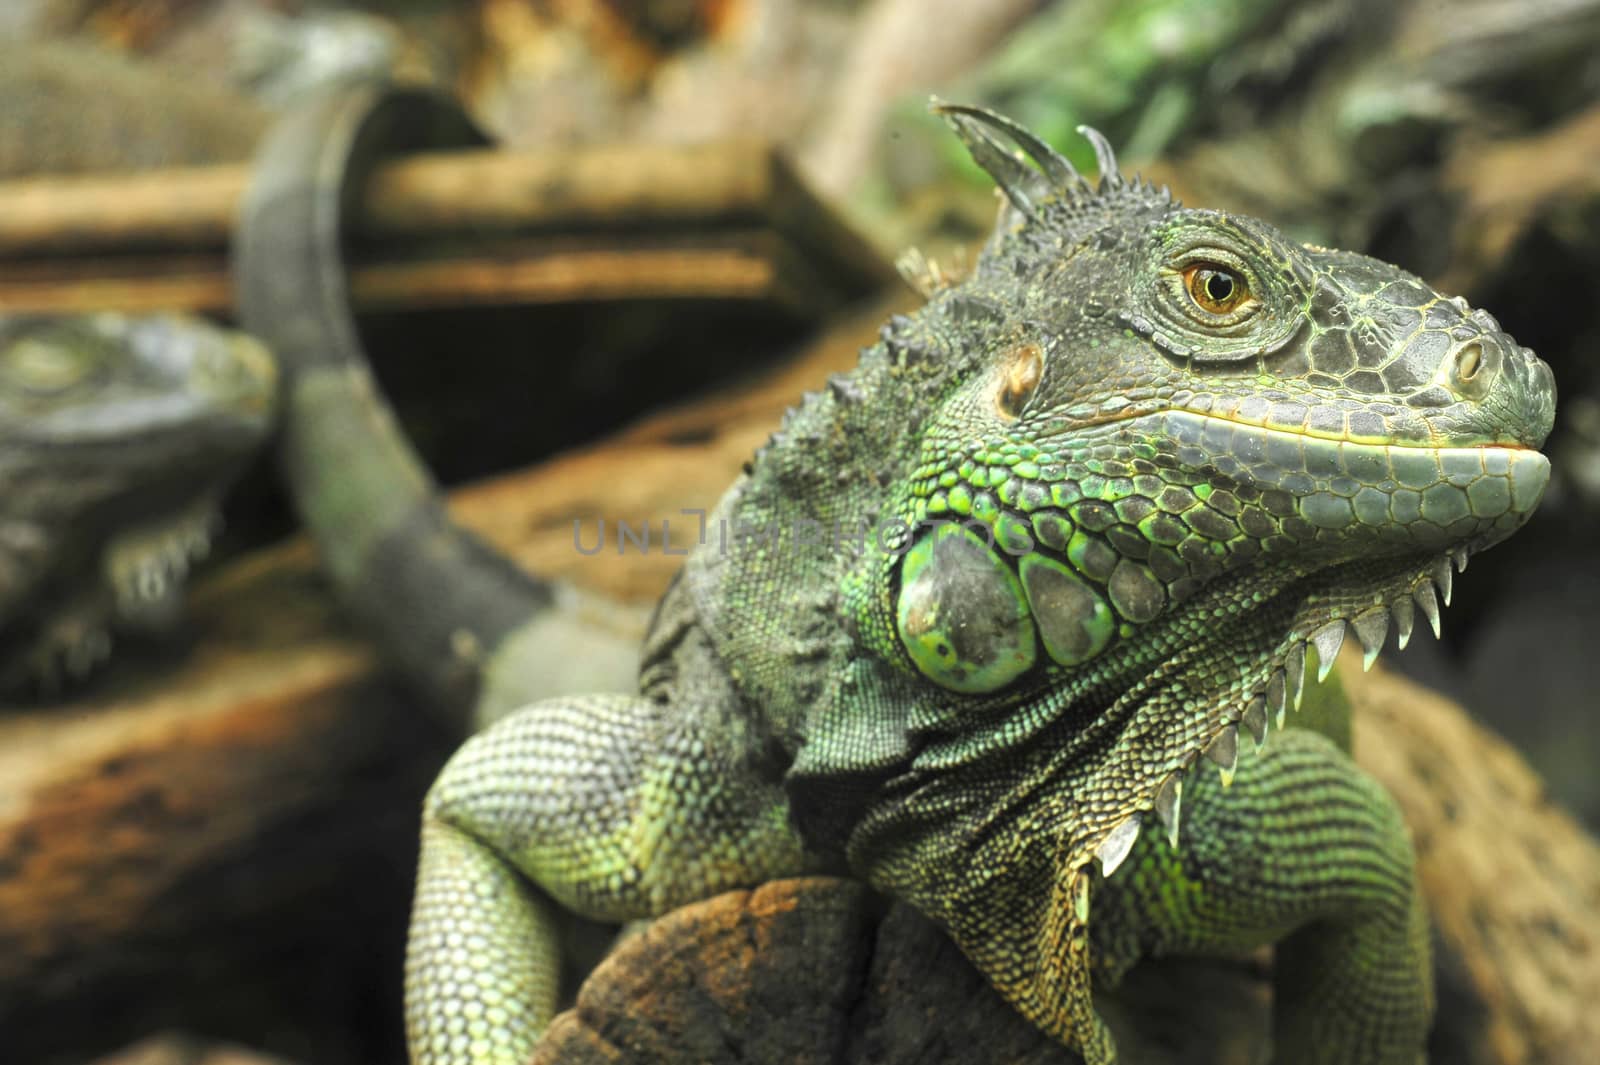 Green Iguana by think4photop